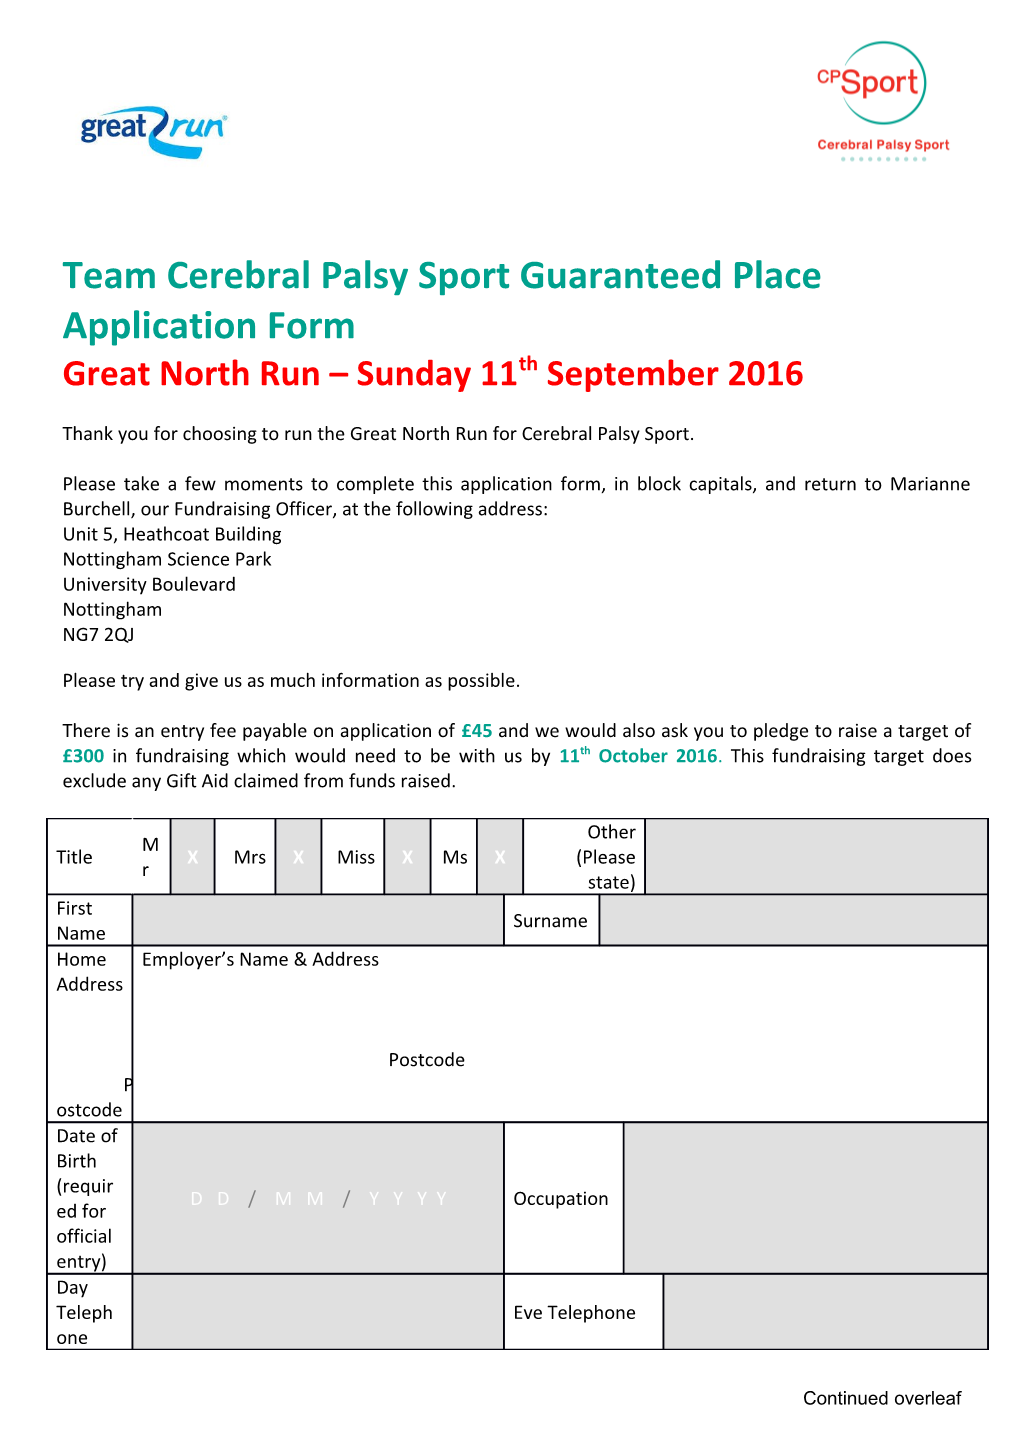 Team Cerebral Palsy Sport Guaranteed Place Application Form